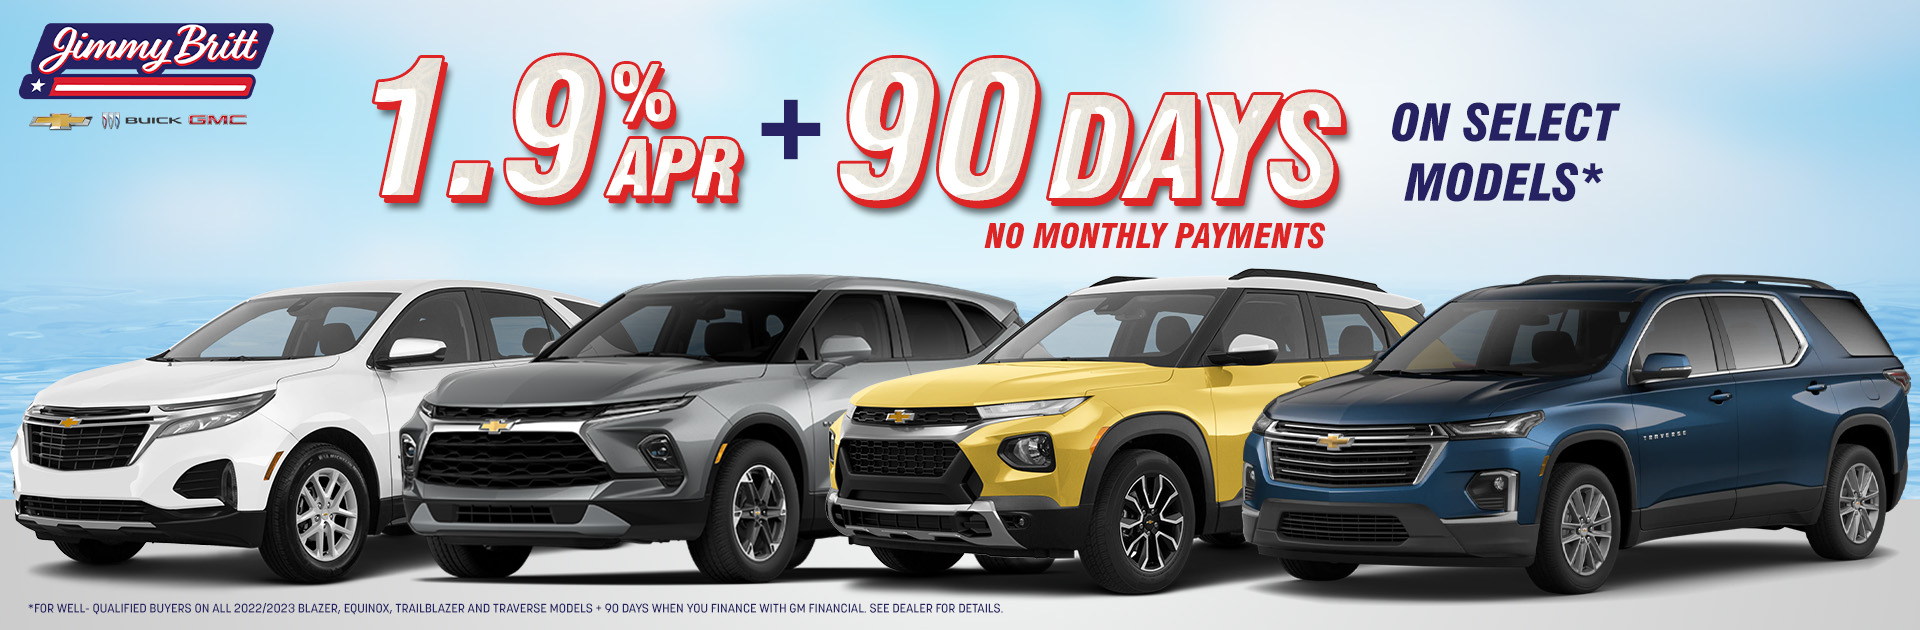 1.9 APR + No Monthly Payments for 90 Days on Select Chevy Models!